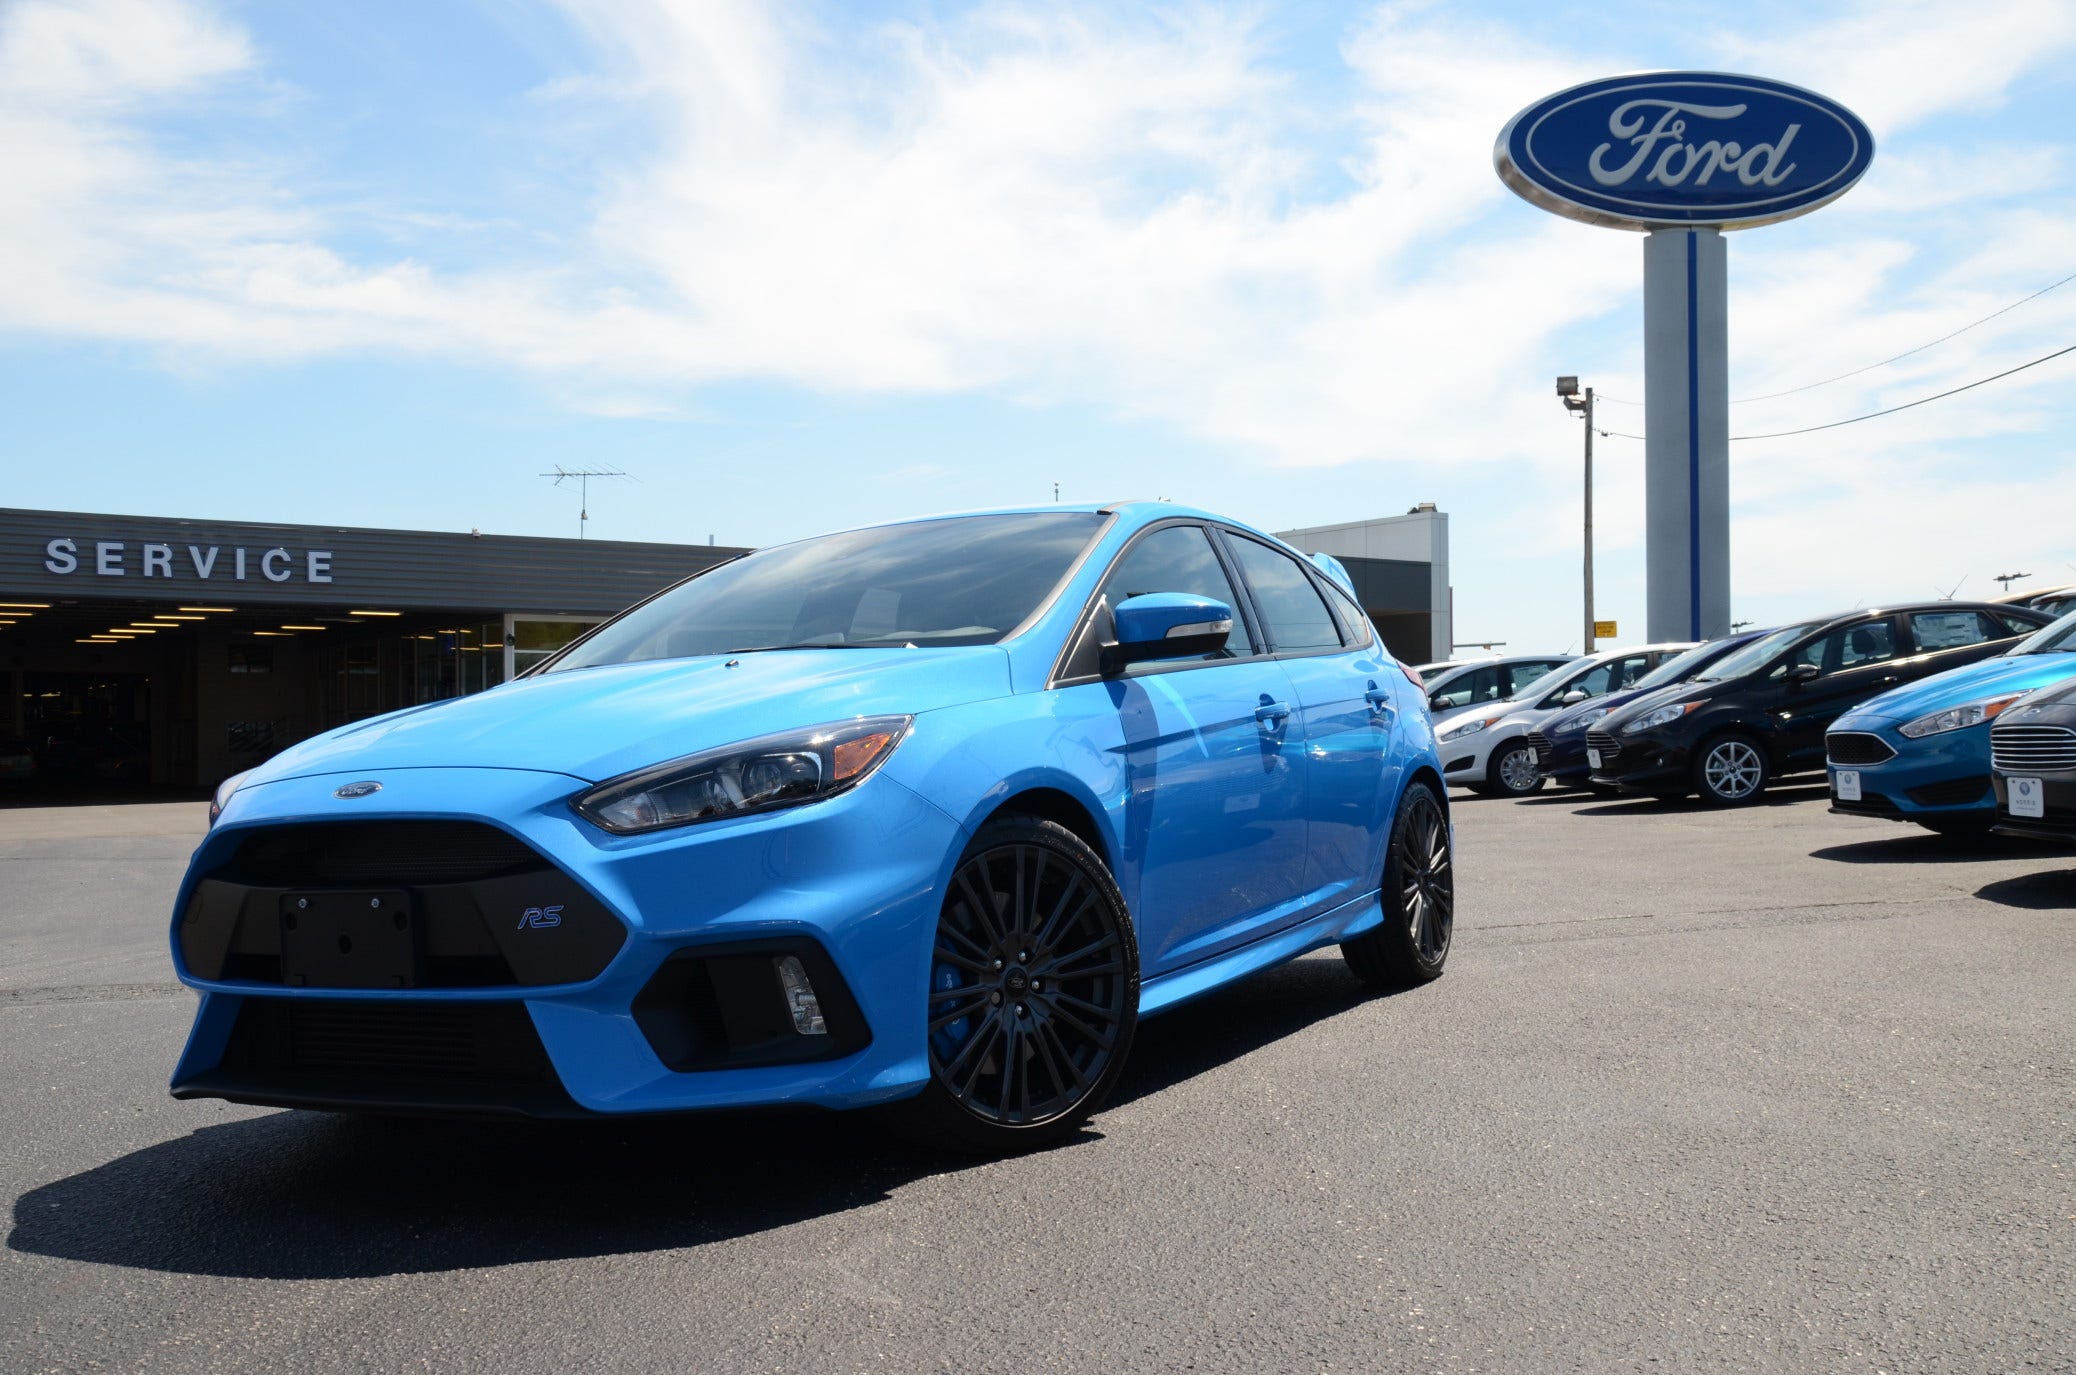 Mishimoto Welcomes its Newest Pupil of Performance - The Focus RS